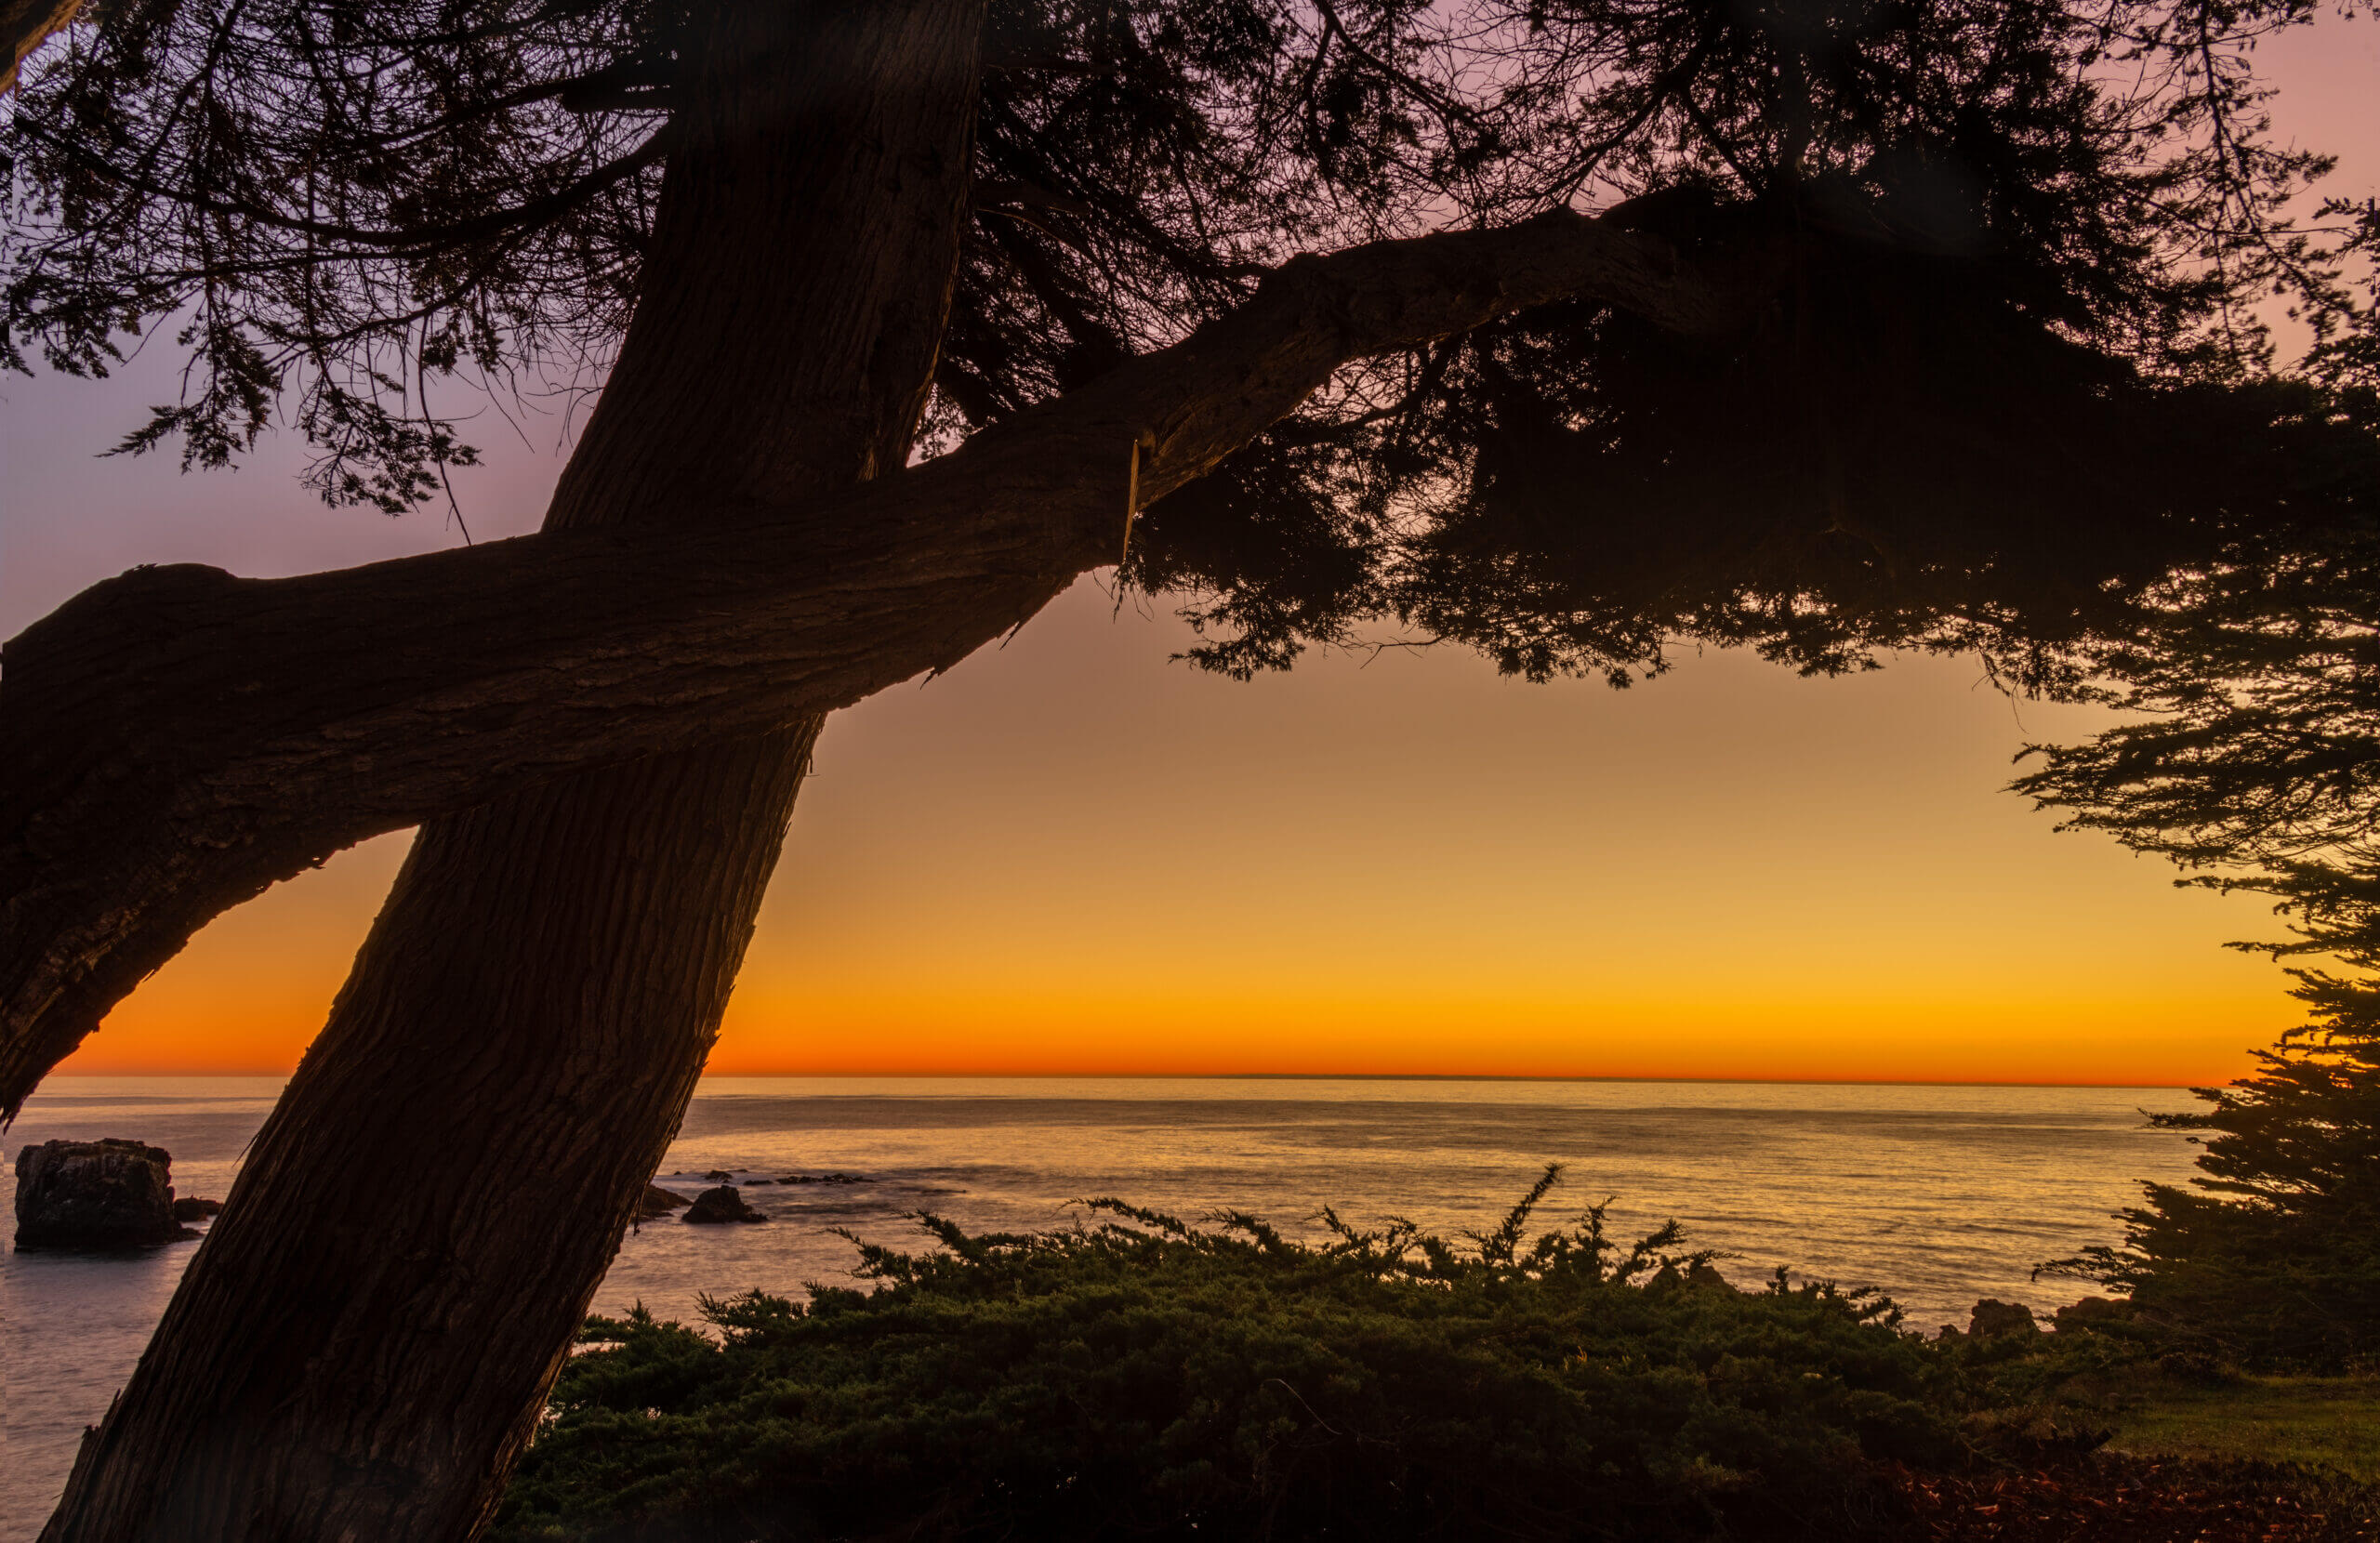 Pelicans Rest outdoor sunset view of ocean with pine trees